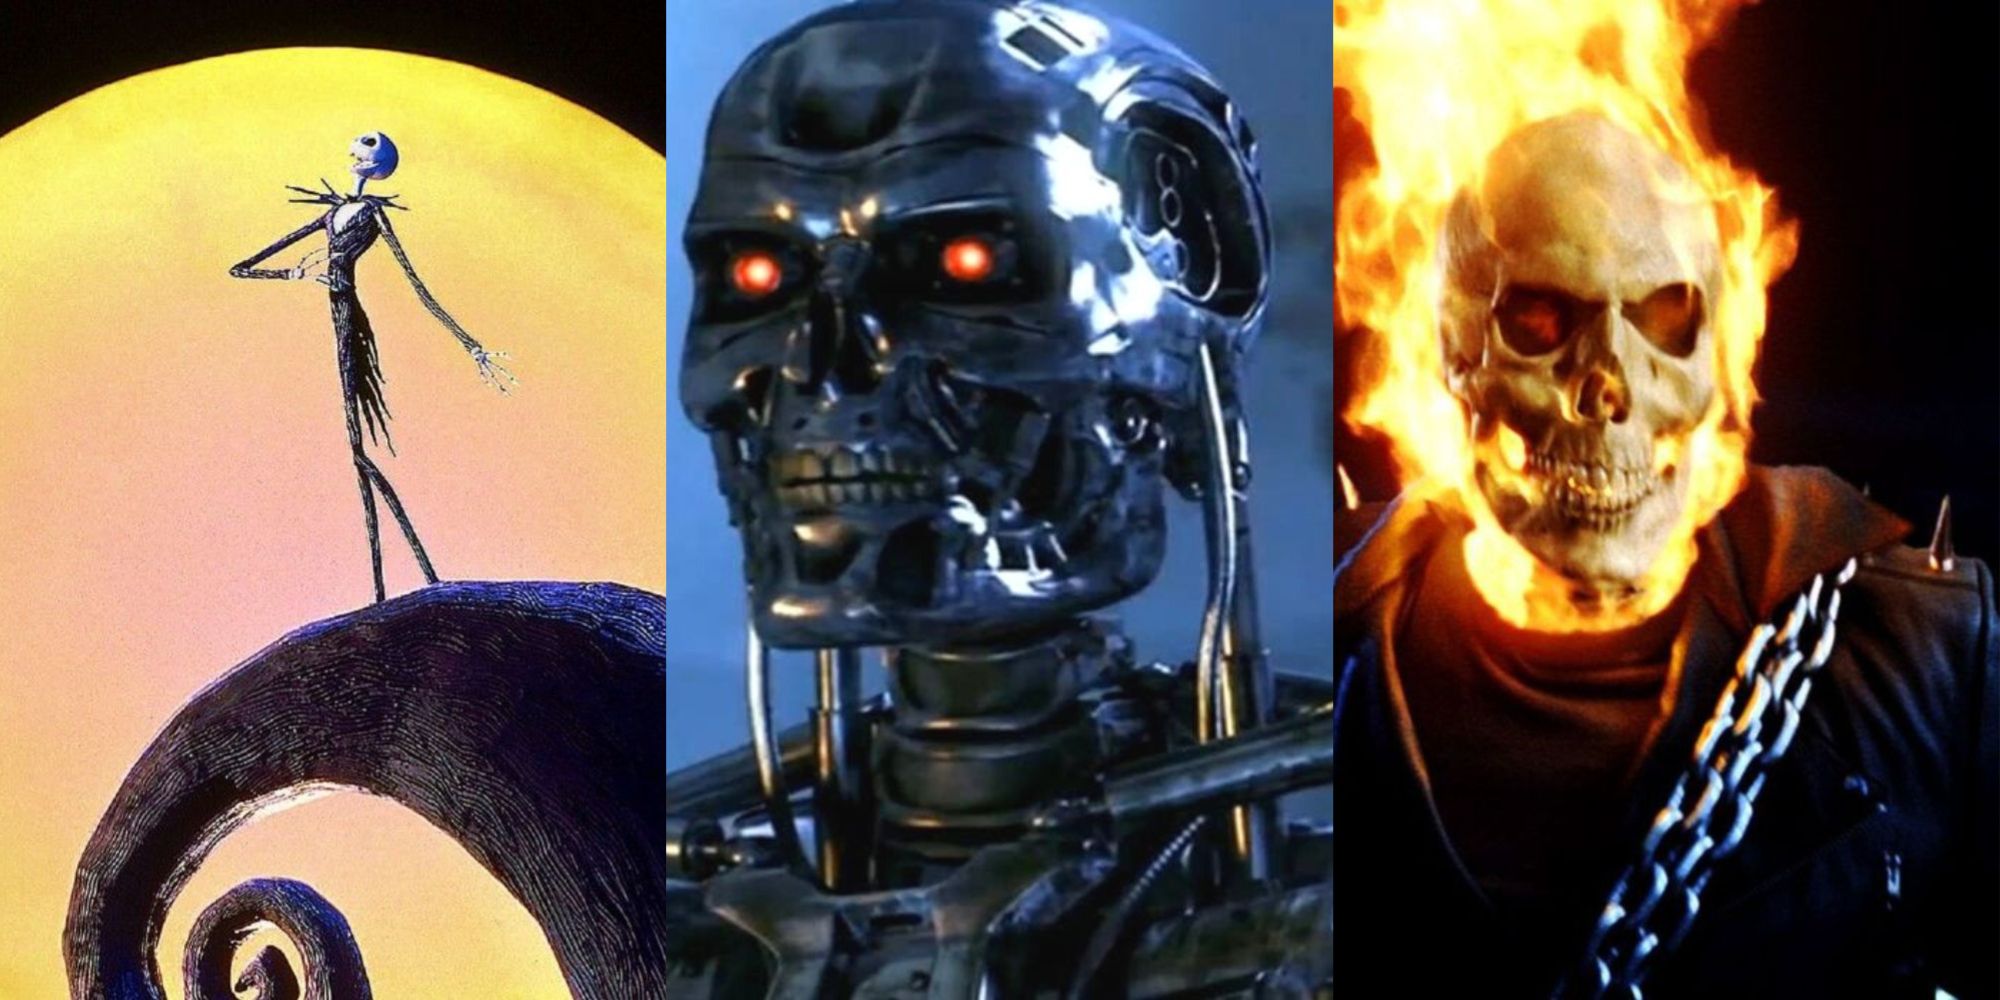 Jack Skellington The Nightmare Before Christmas, T-800 The Terminator, And Ghost Rider